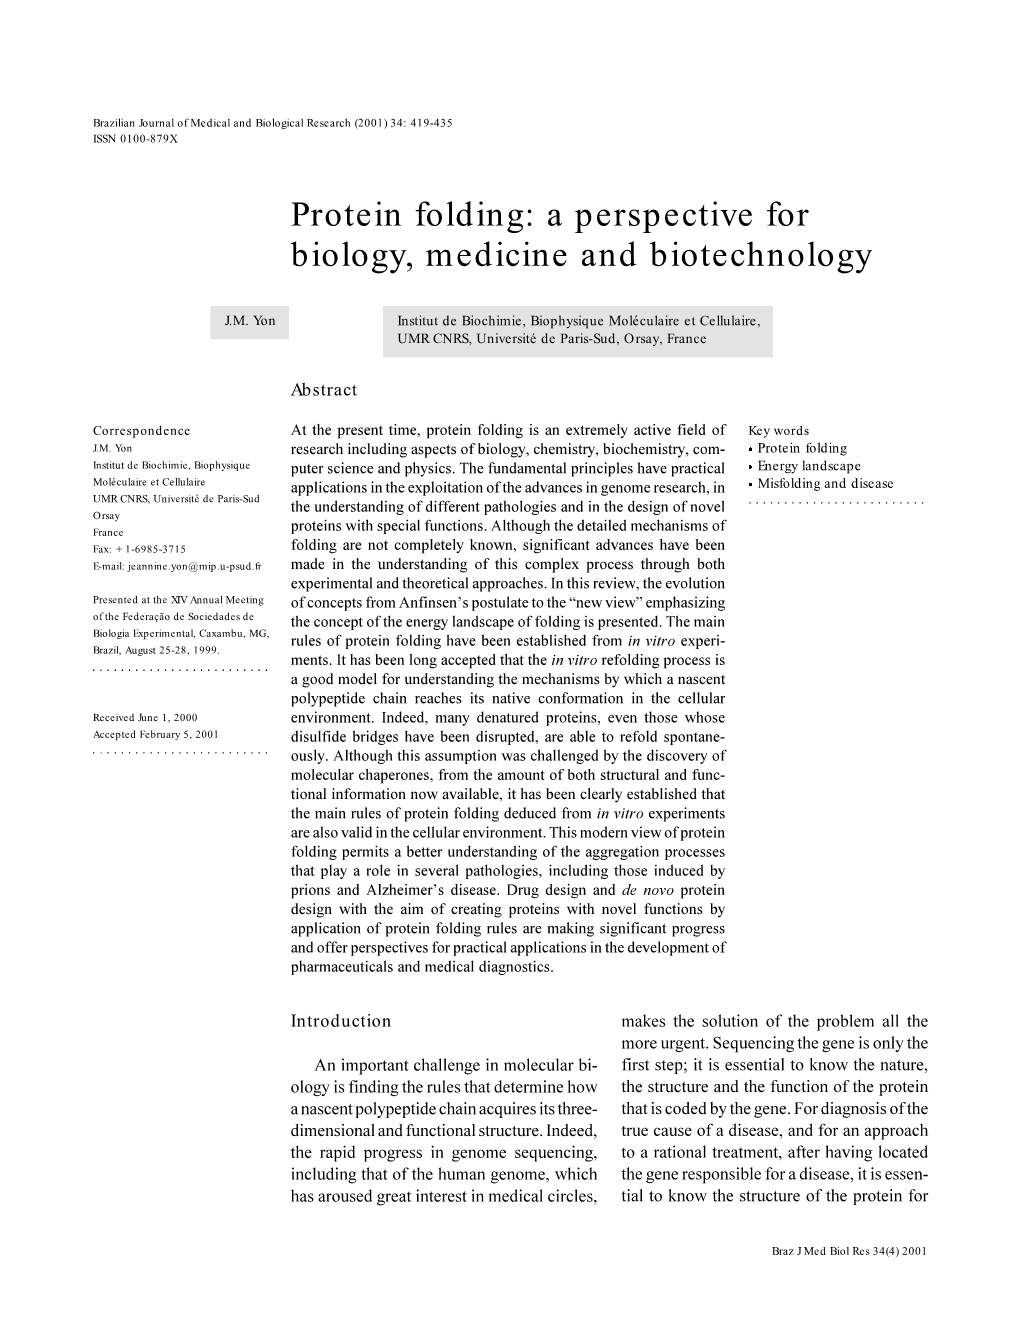 Protein Folding: a Perspective for Biology, Medicine and Biotechnology